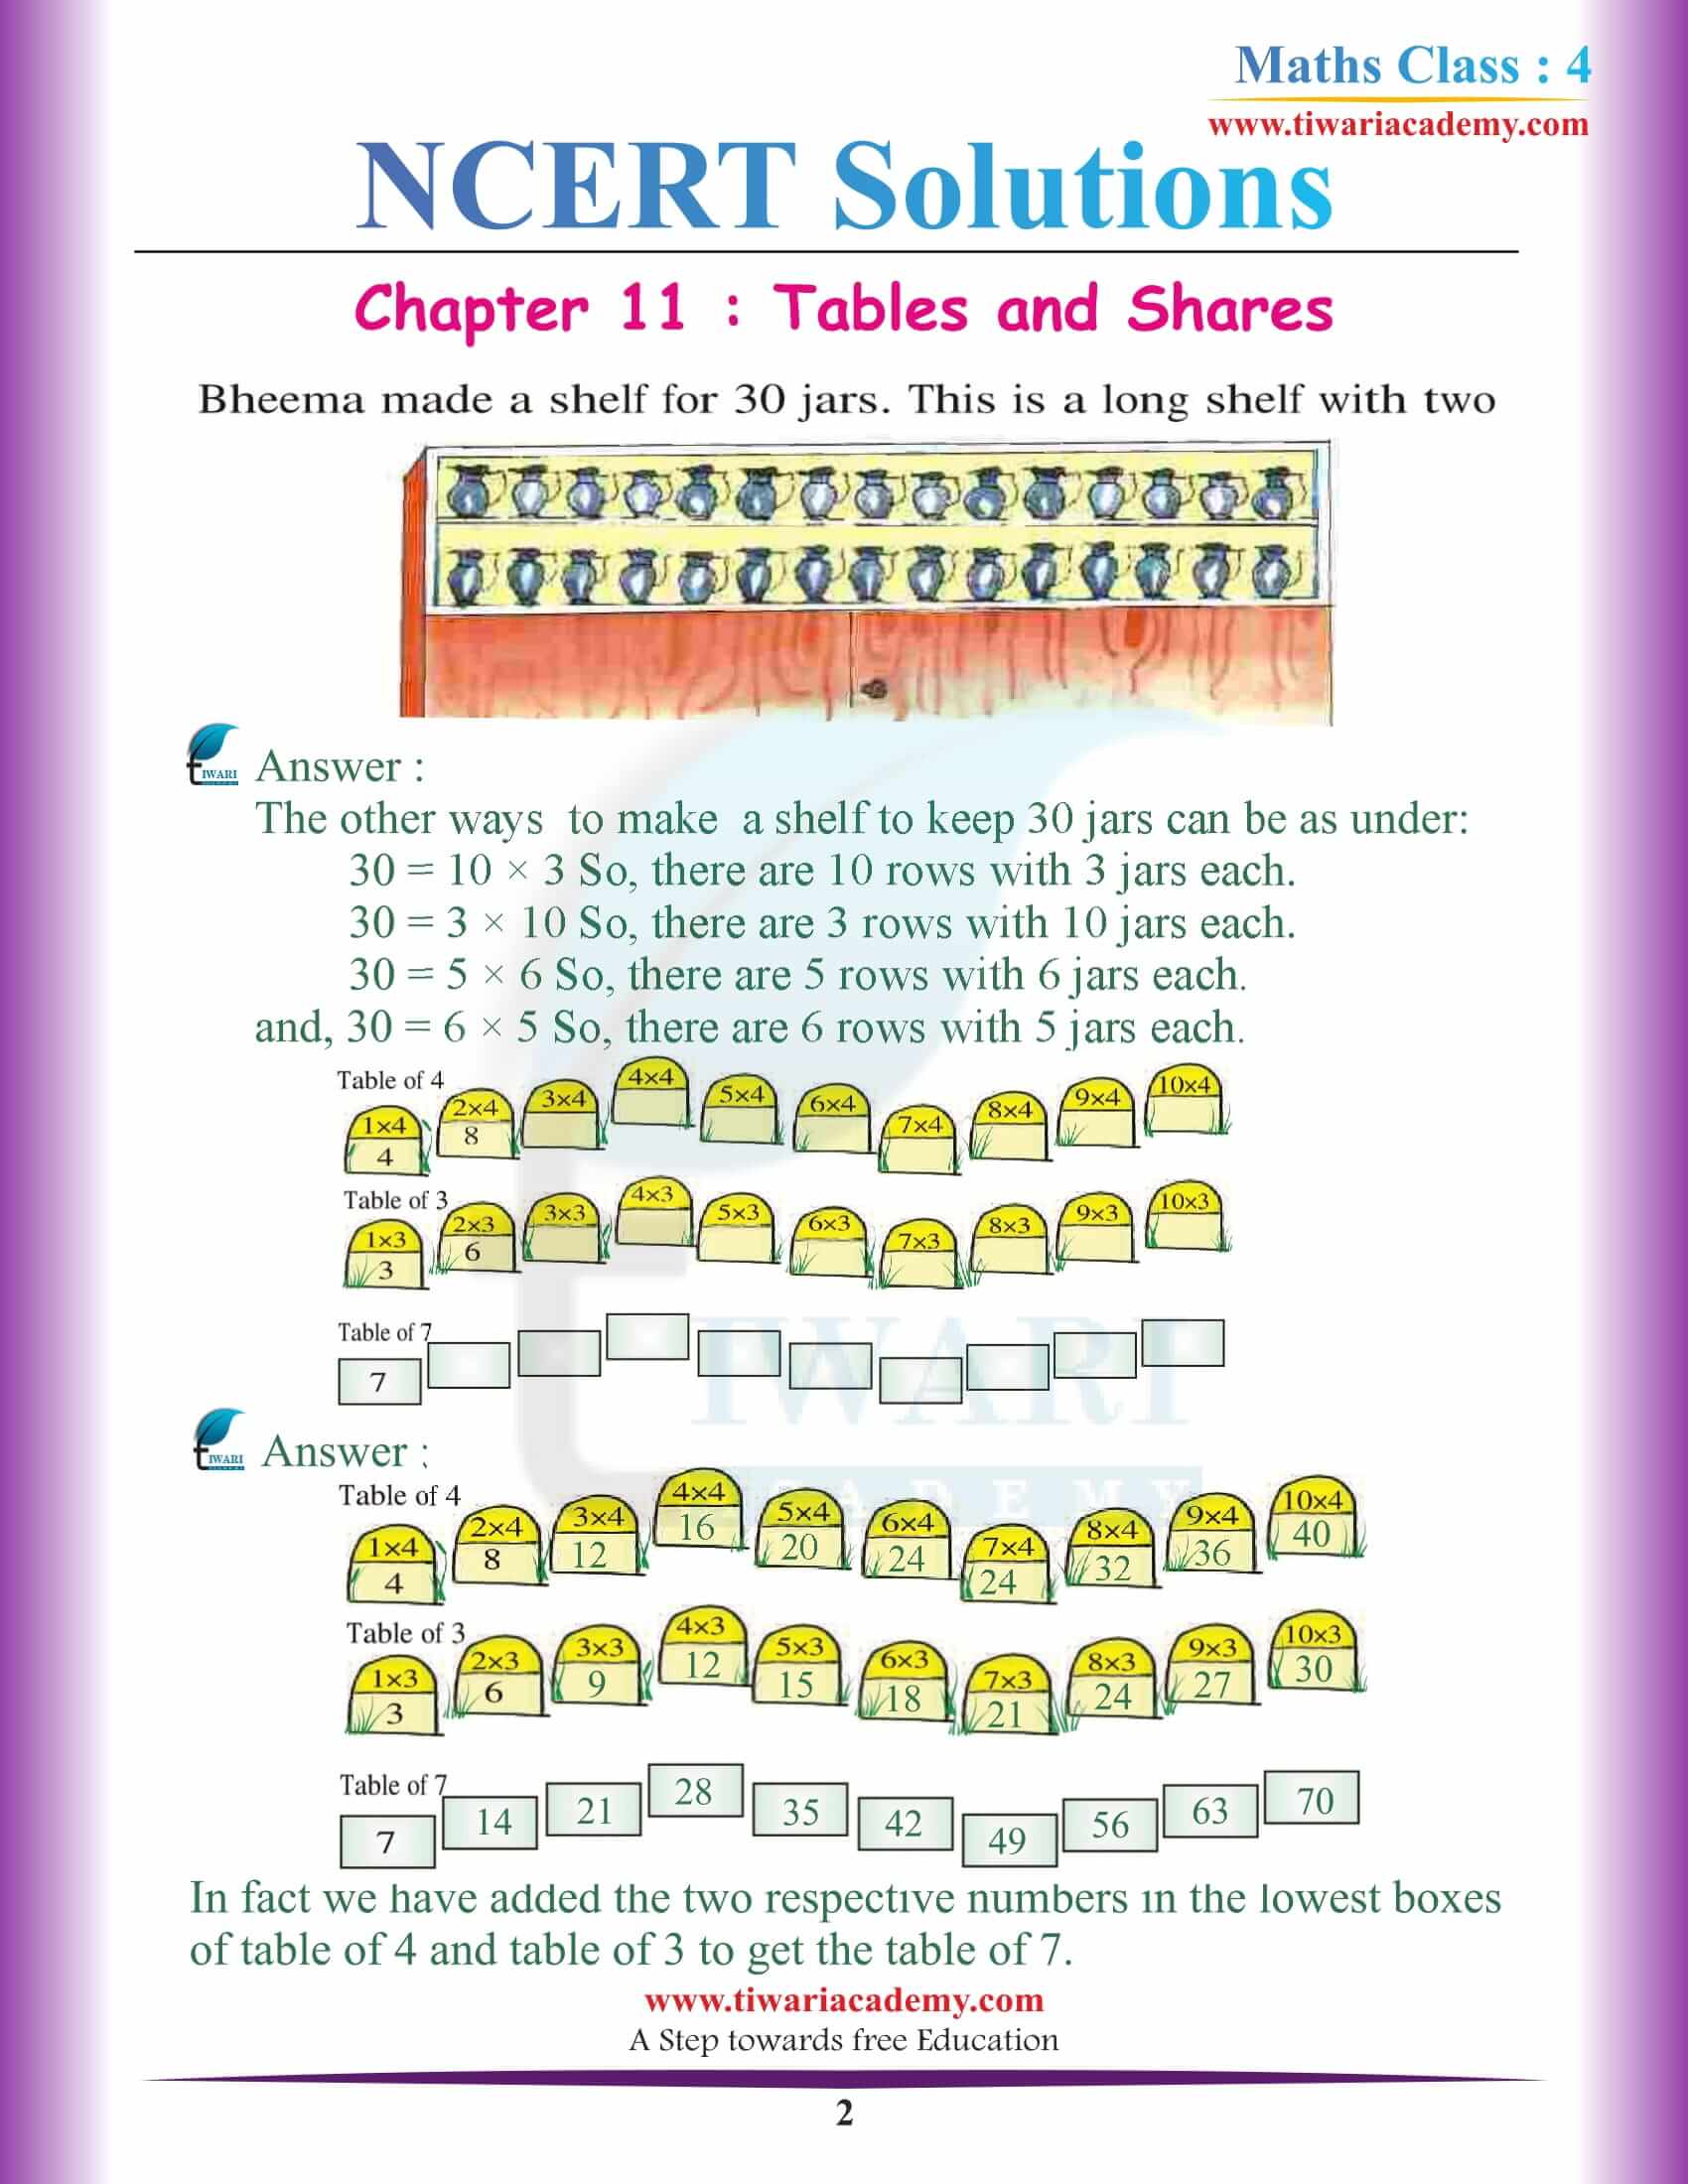 NCERT Solutions for Class 4 Maths Chapter 11 Tables and Shares